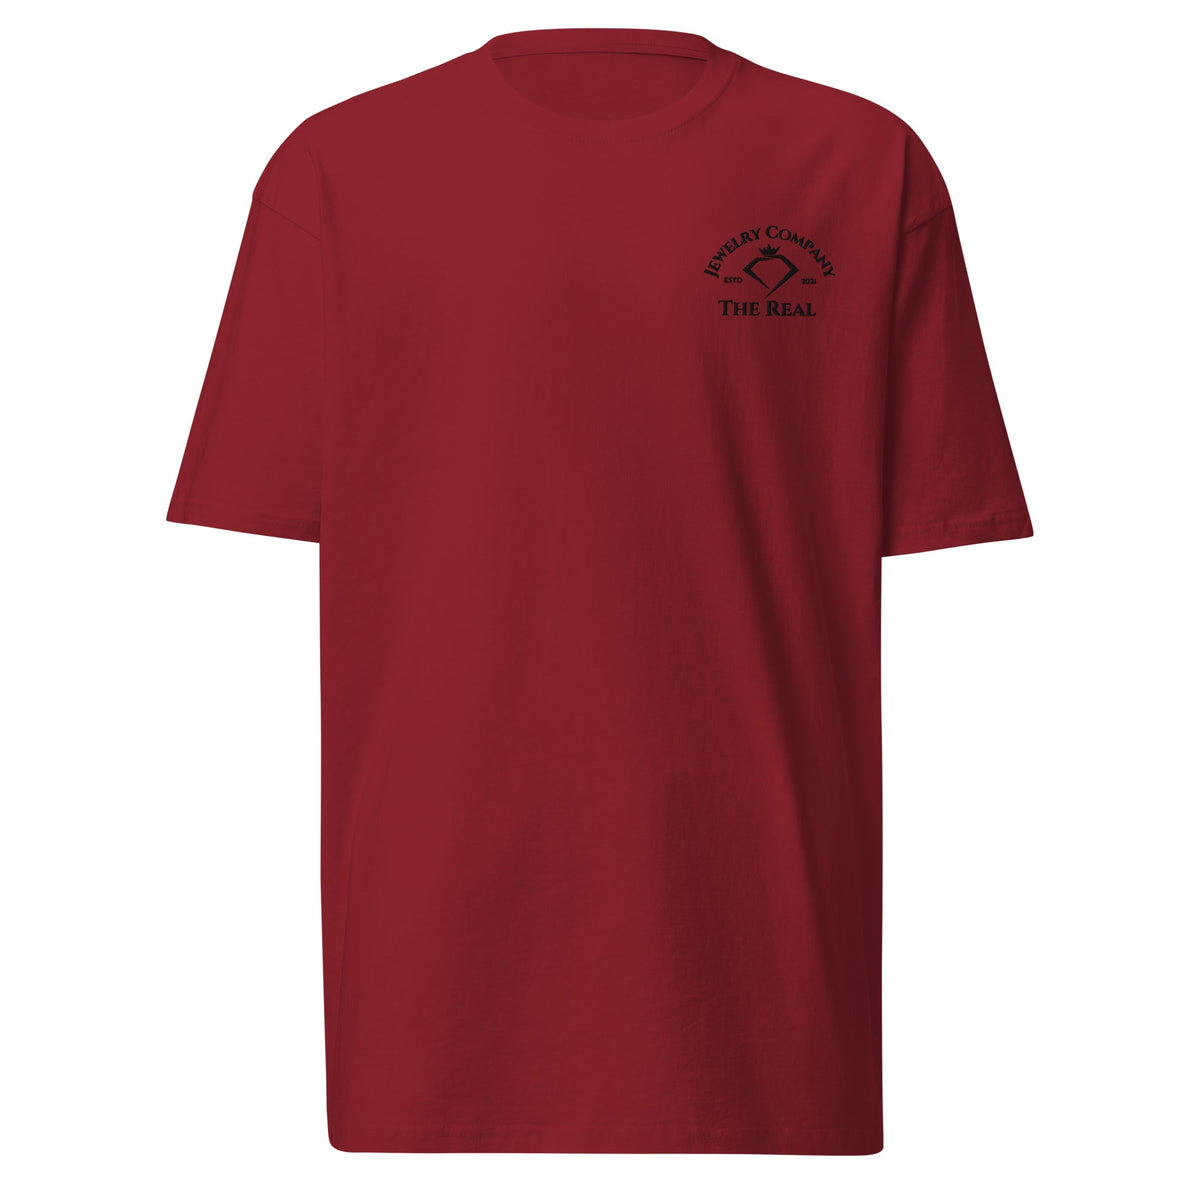 Premium Embroidered T-Shirt - The Real Jewelry CompanyThe Real Jewelry Company